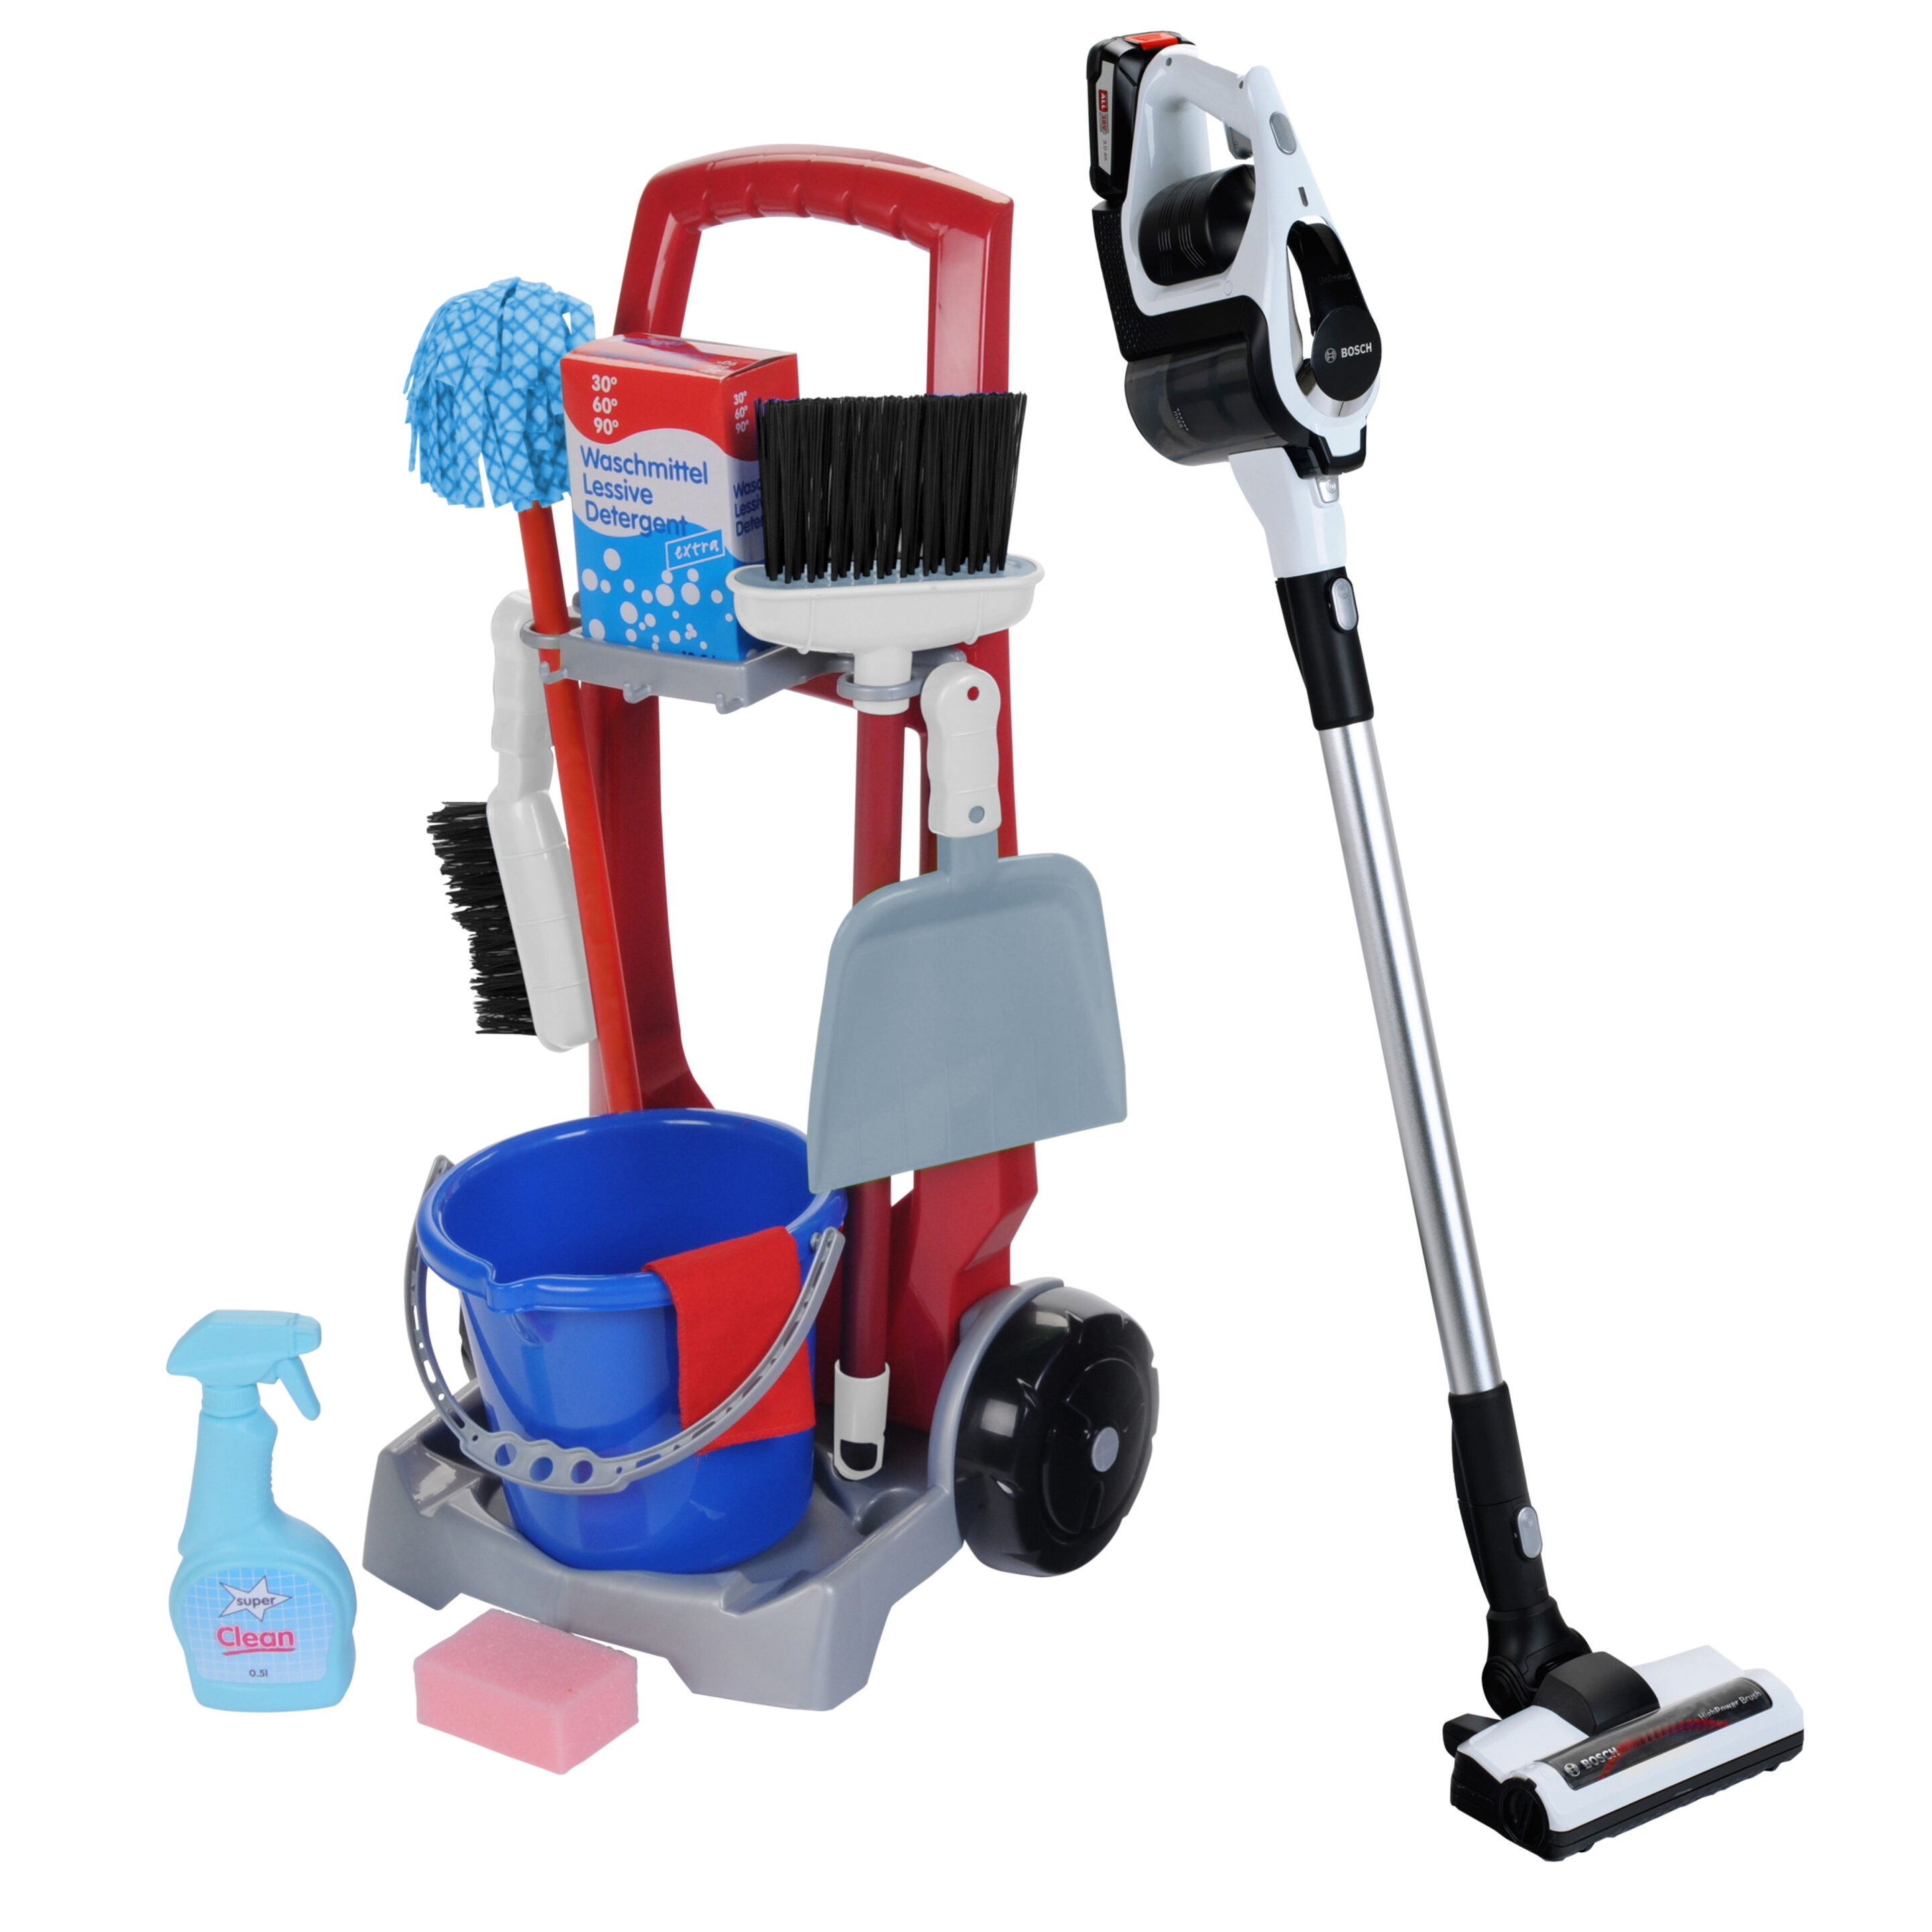 Bosch - Vacuum Cleaner "Unlimited" and Cleaning Trolley